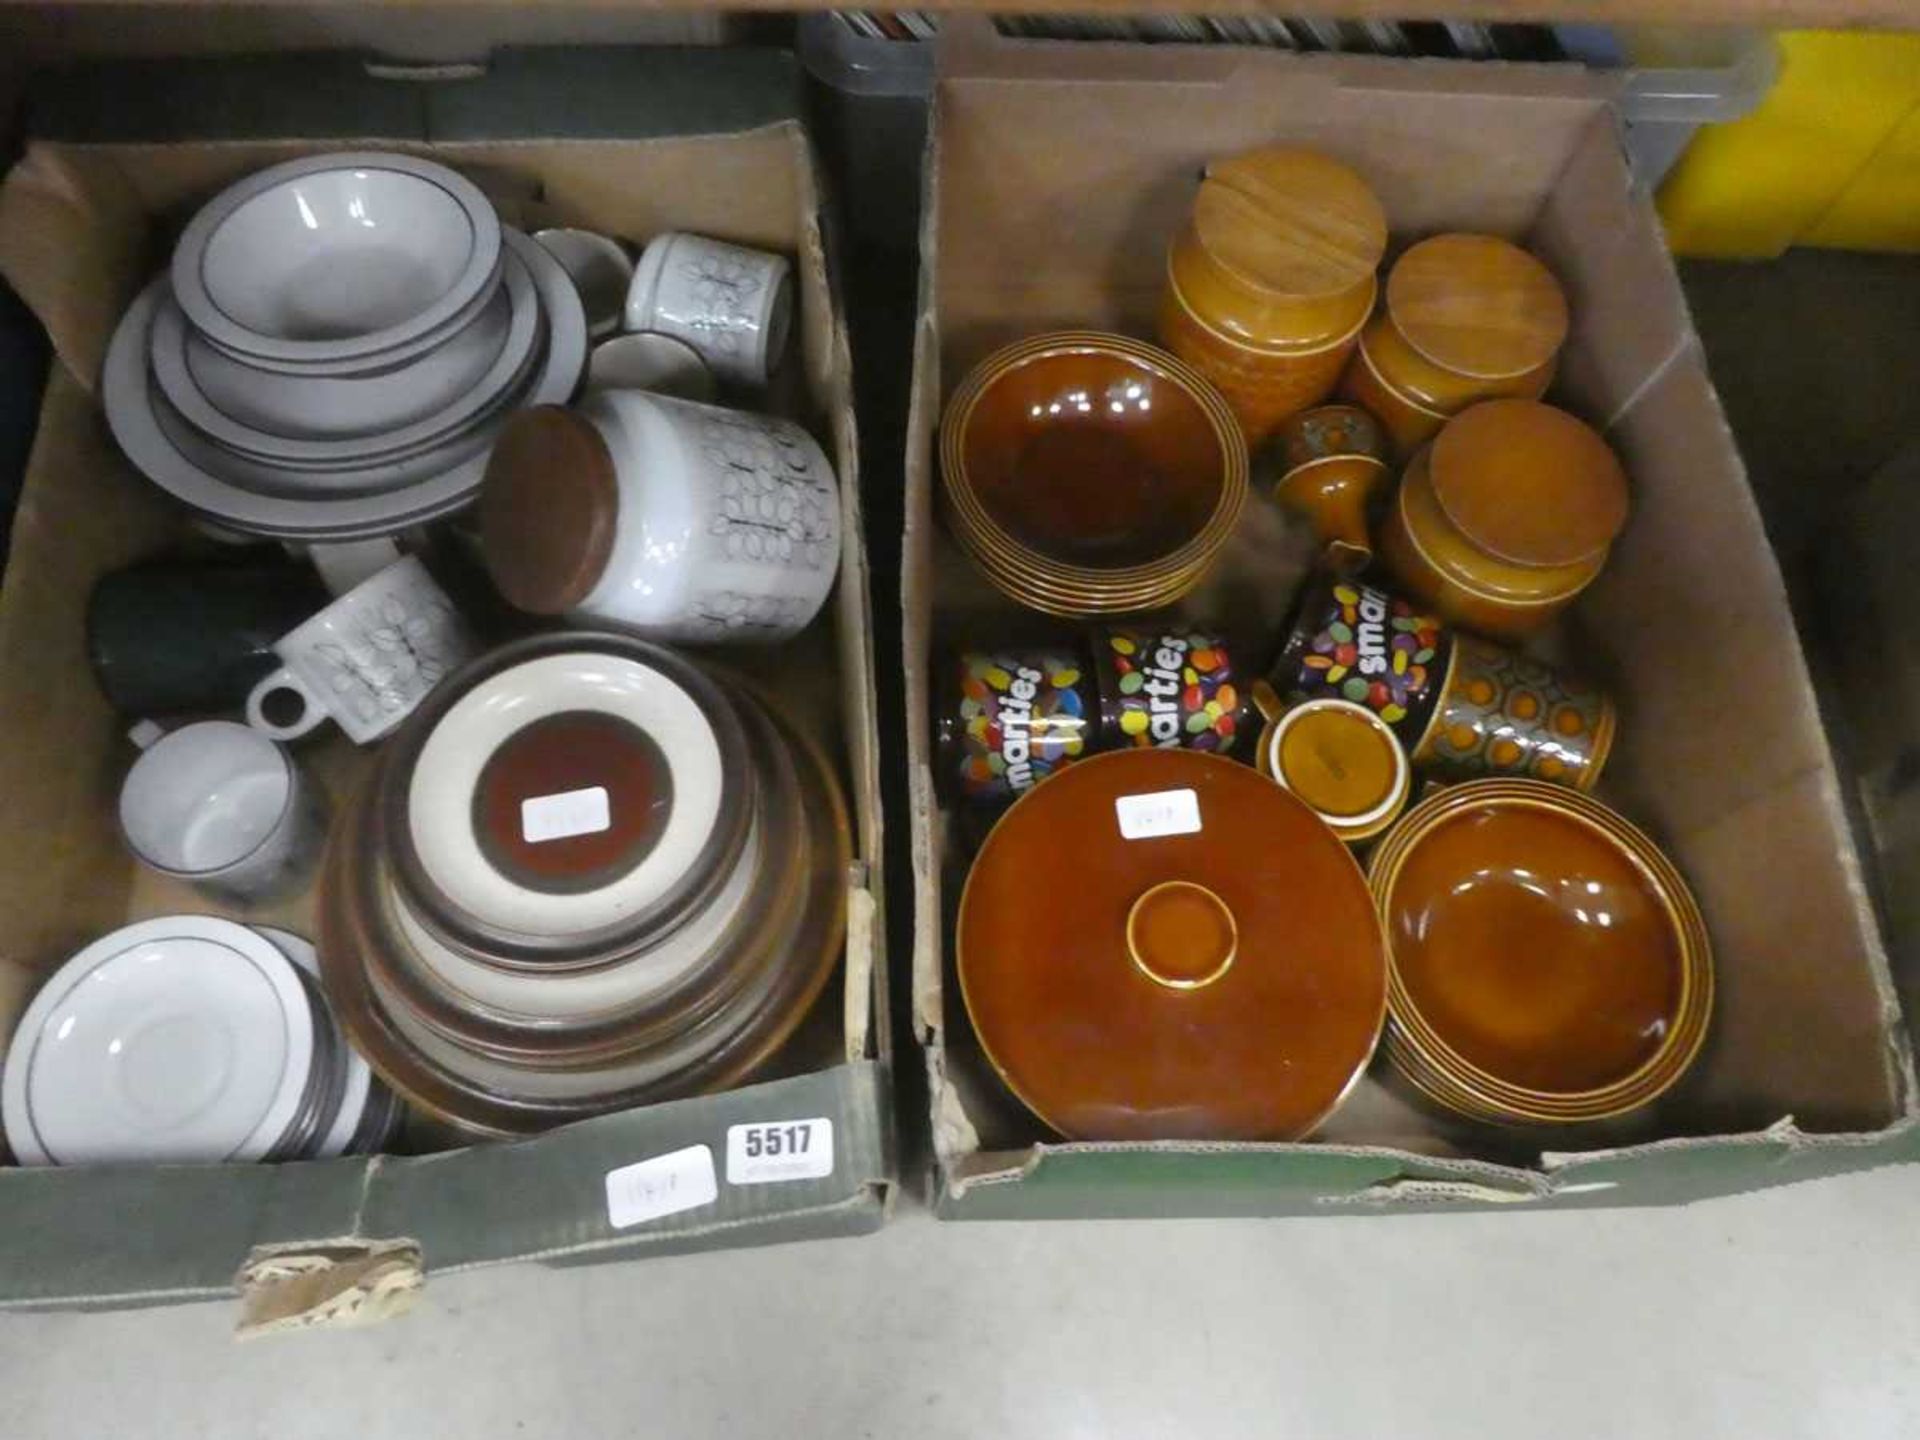 Two boxes containing Denby and Hornsey crockery